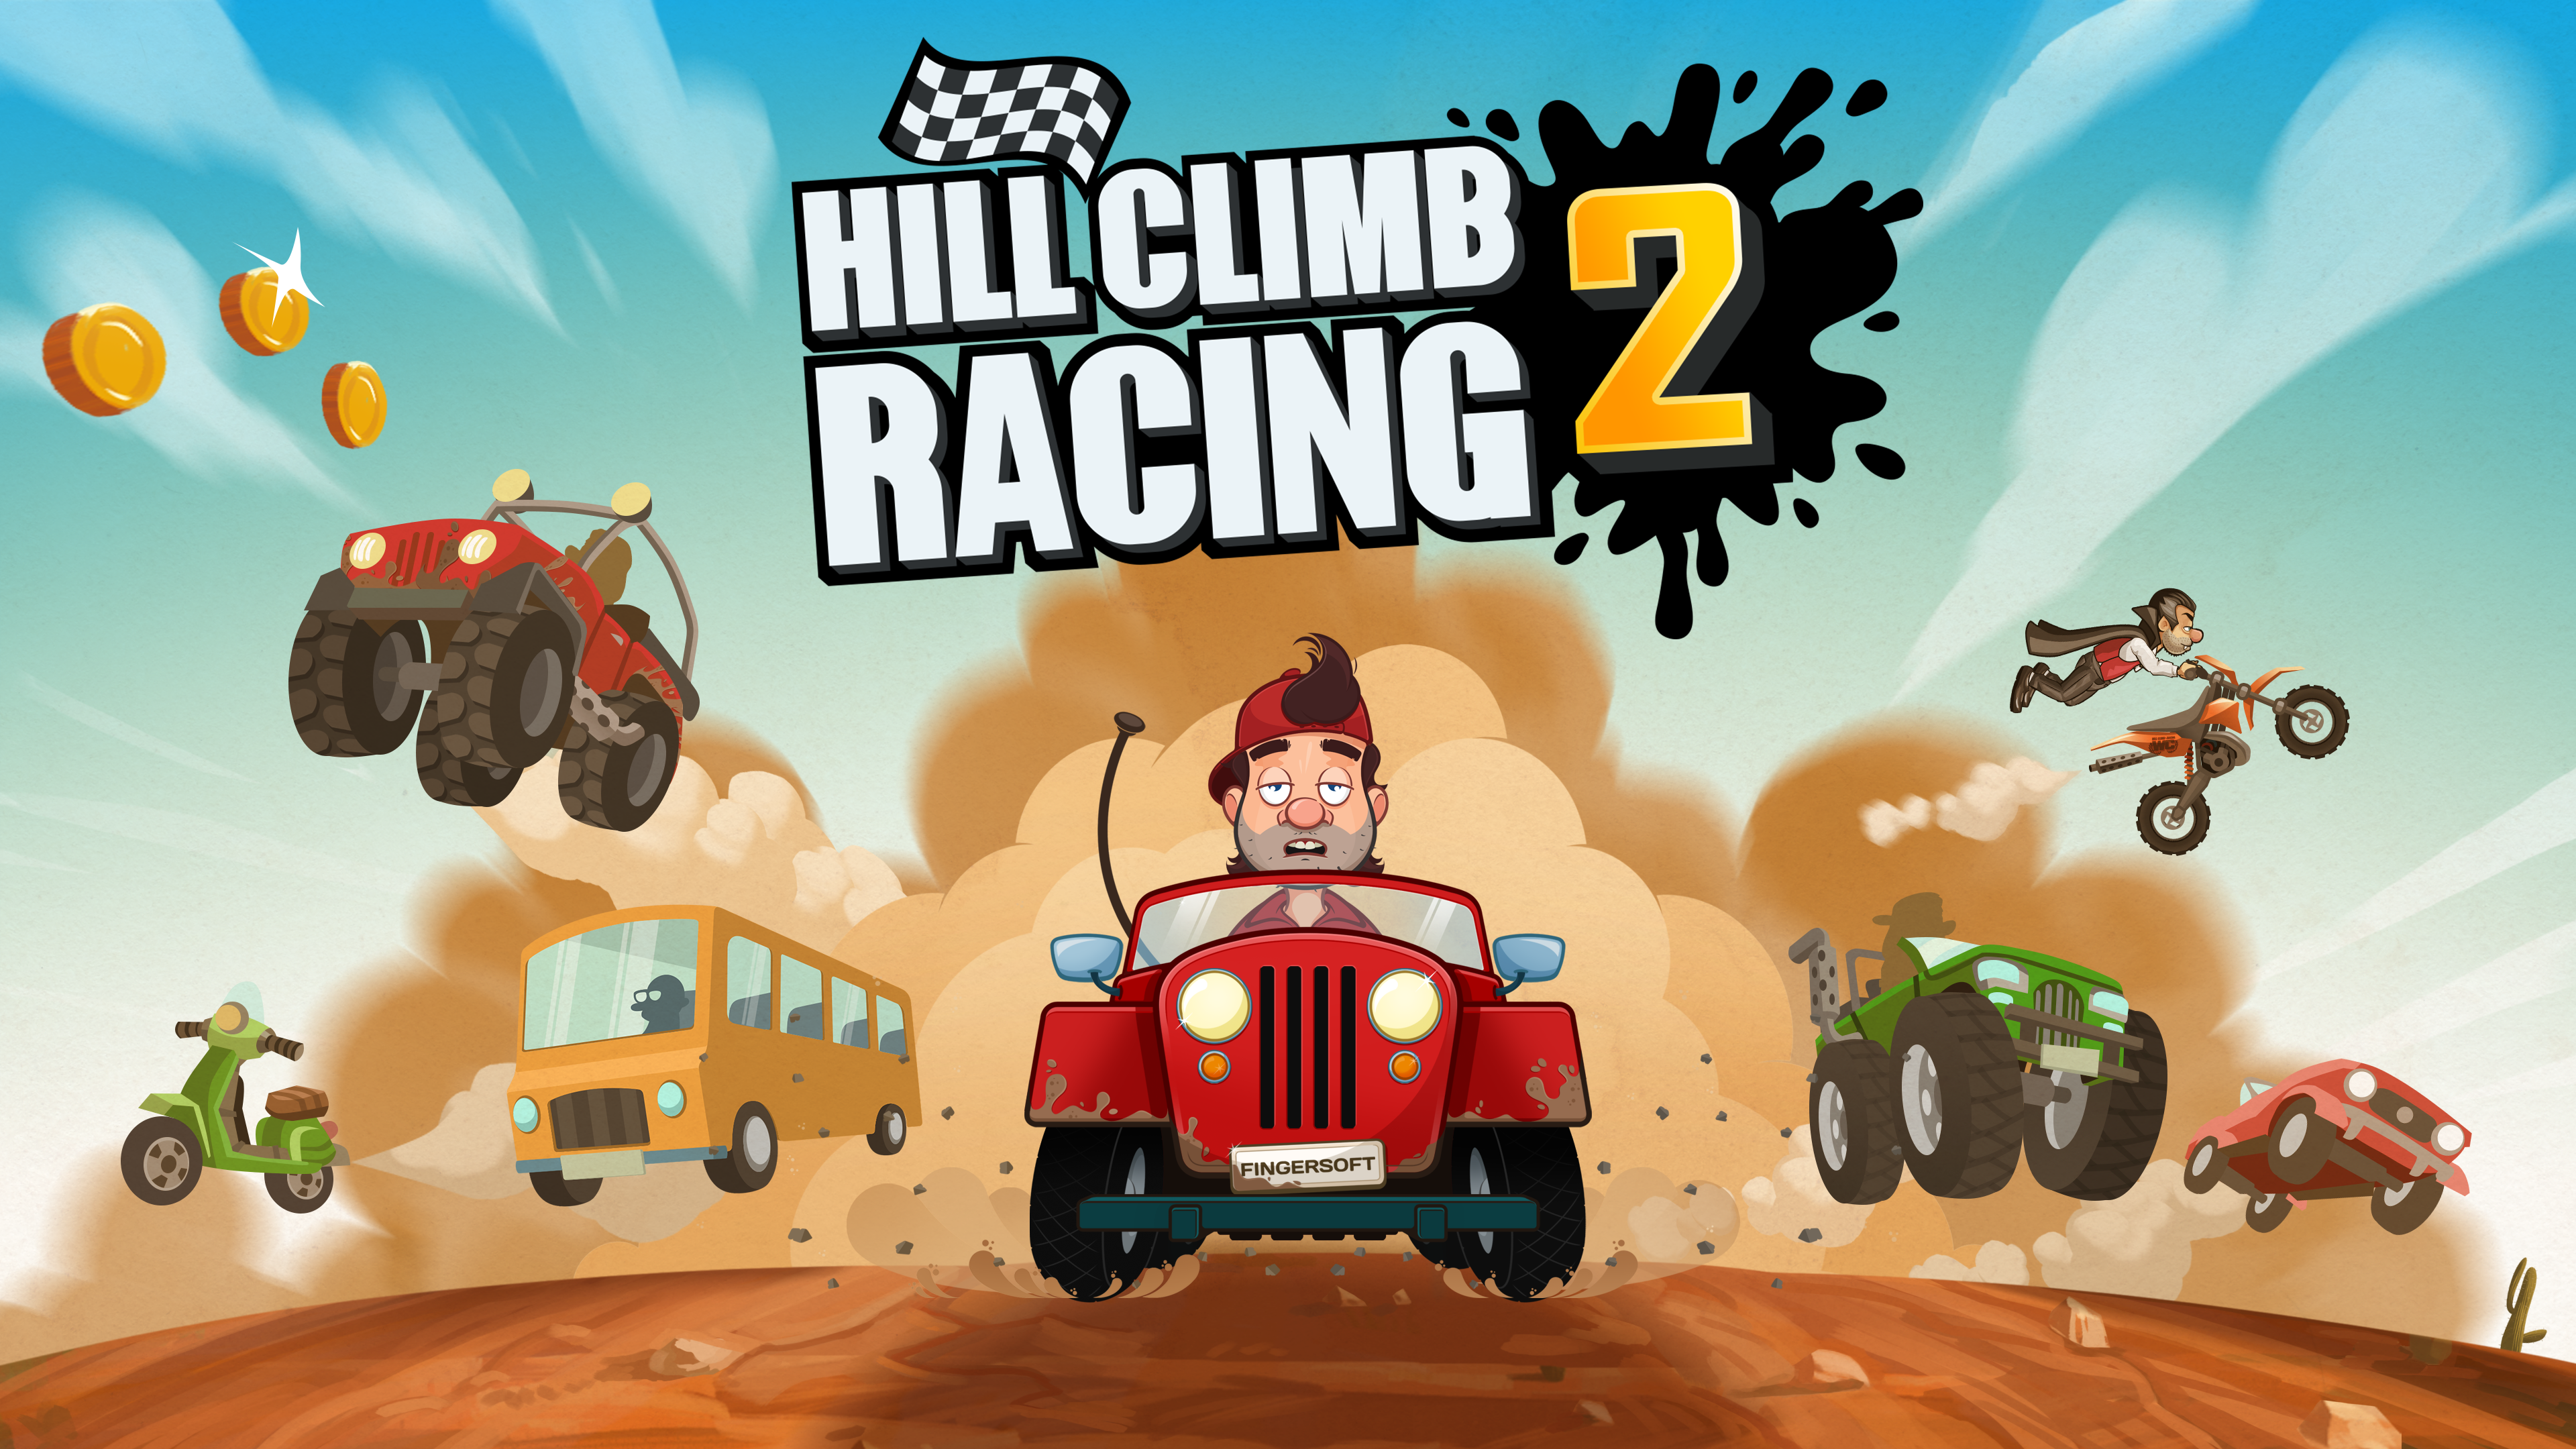 Fingersoft's Hill Climb Racing 2 Launches on Android! Marooners' Rock